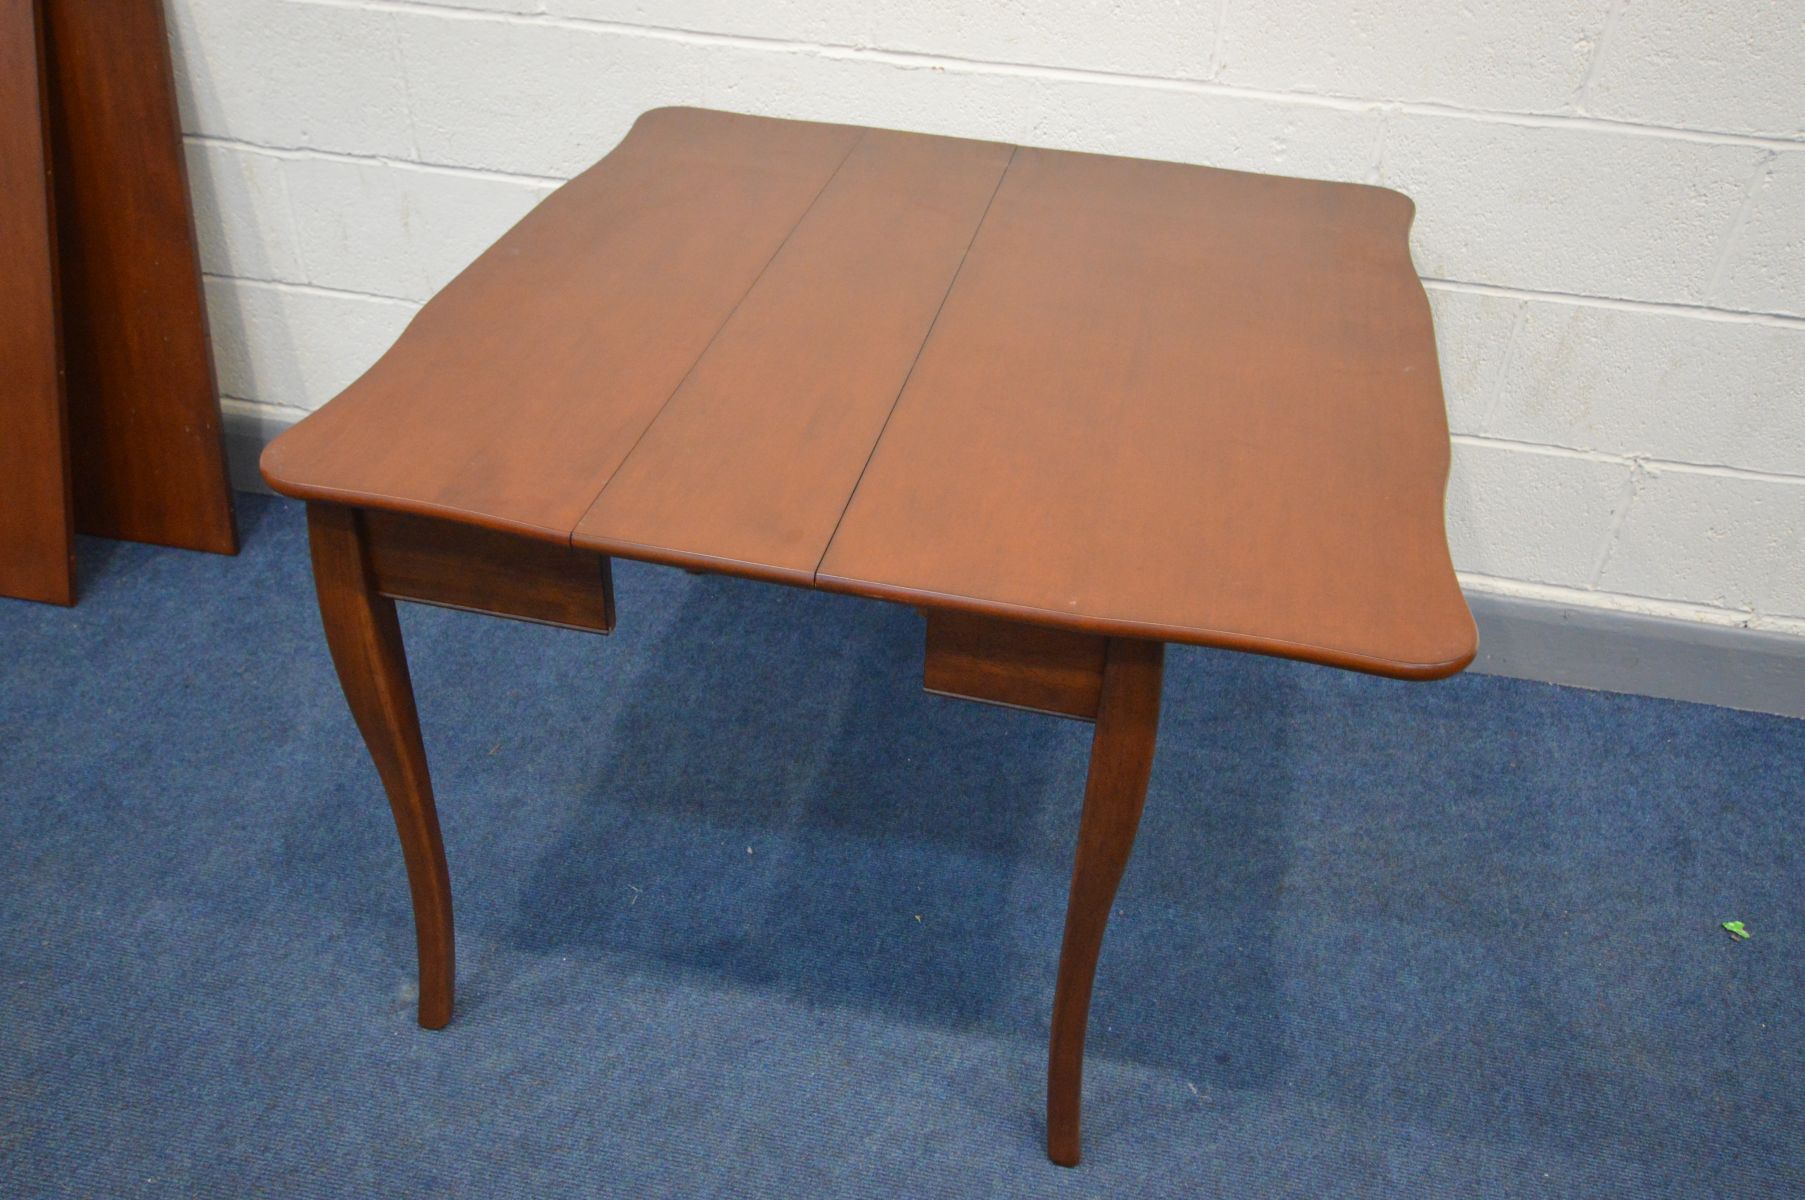 AN CHERRYWOOD EXTENDING DINING TABLE, that folds out from a tea table, with two additional leaves, - Image 3 of 4